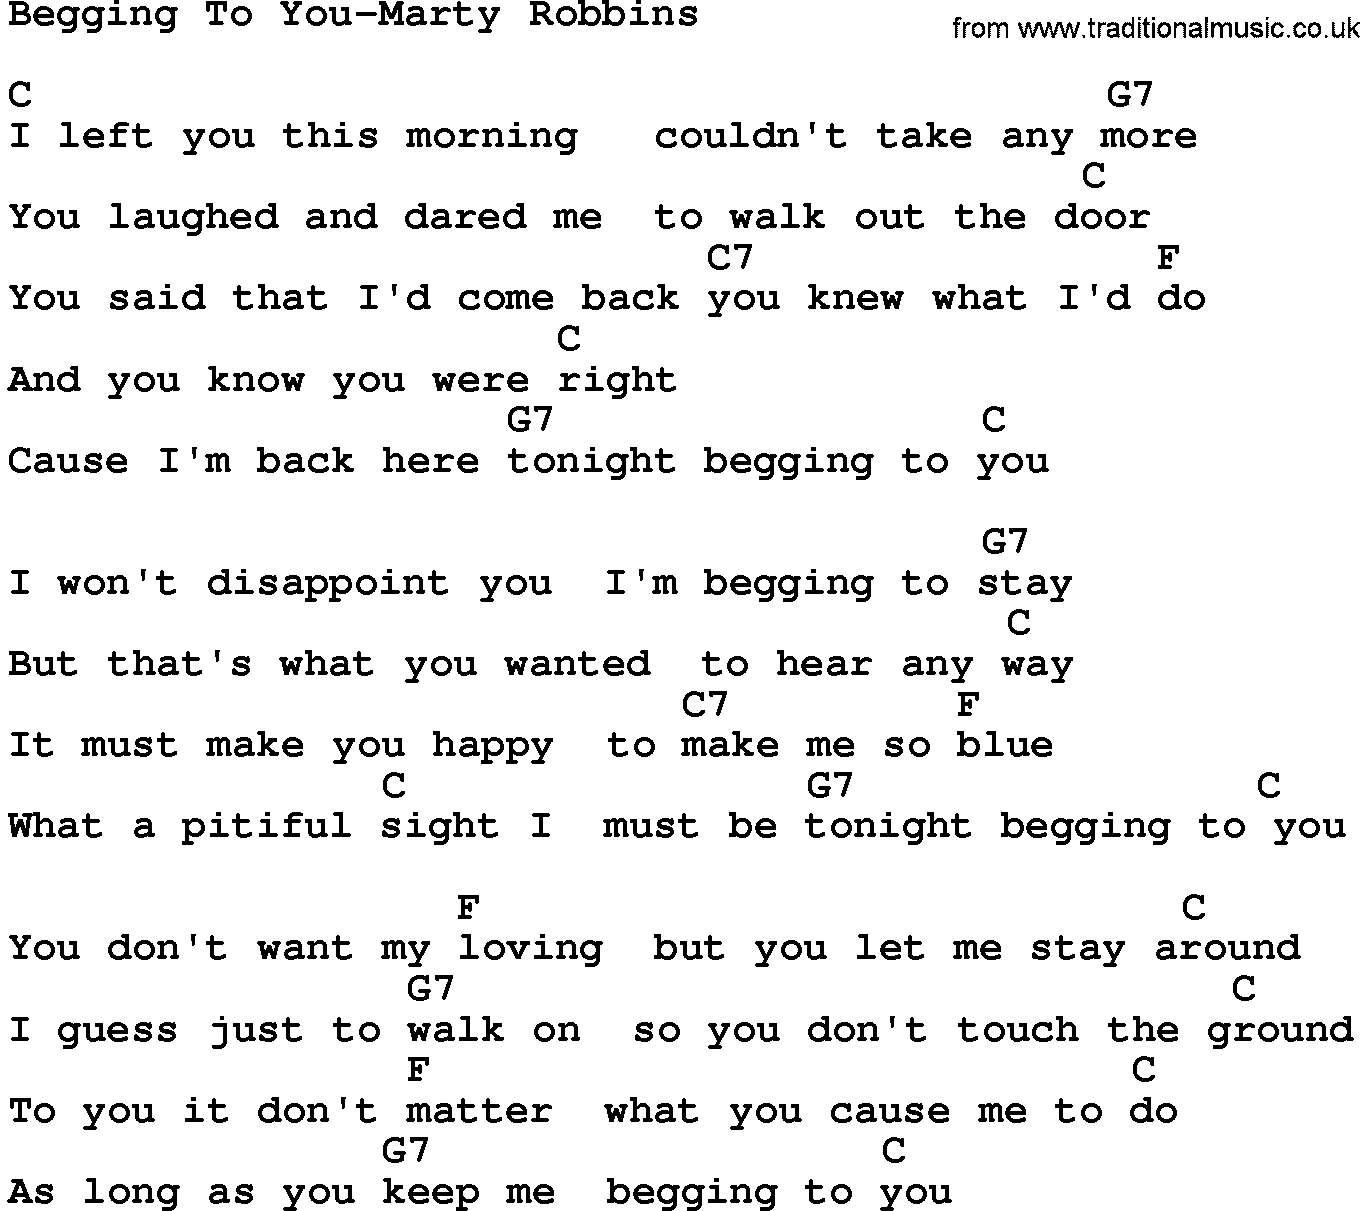 Country music song: Begging To You-Marty Robbins lyrics and chords